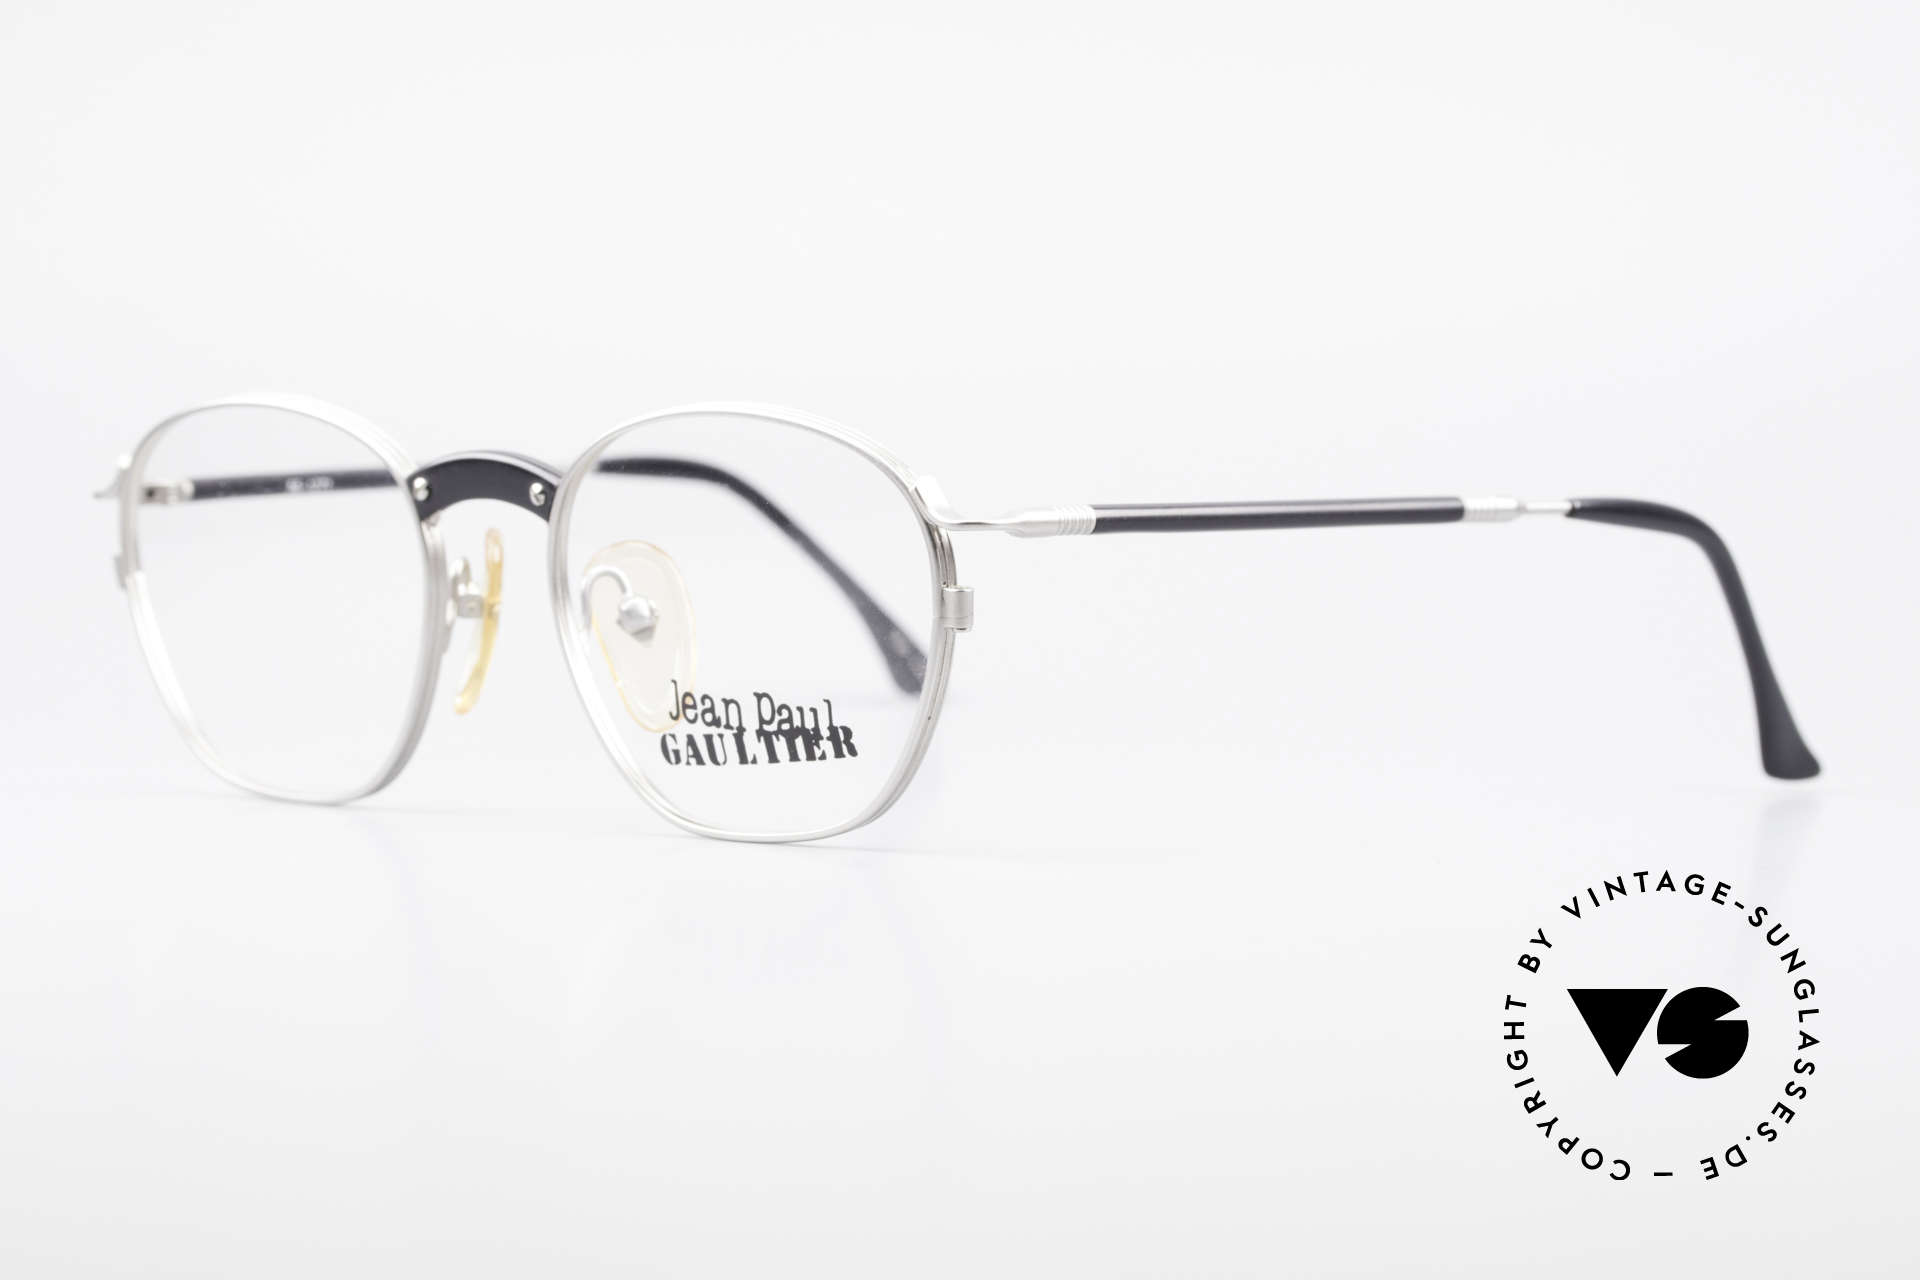 Jean Paul Gaultier 55-1271 Rare JPG Vintage Eyeglasses, simply a timeless classic in top-notch craftsmanship, Made for Men and Women